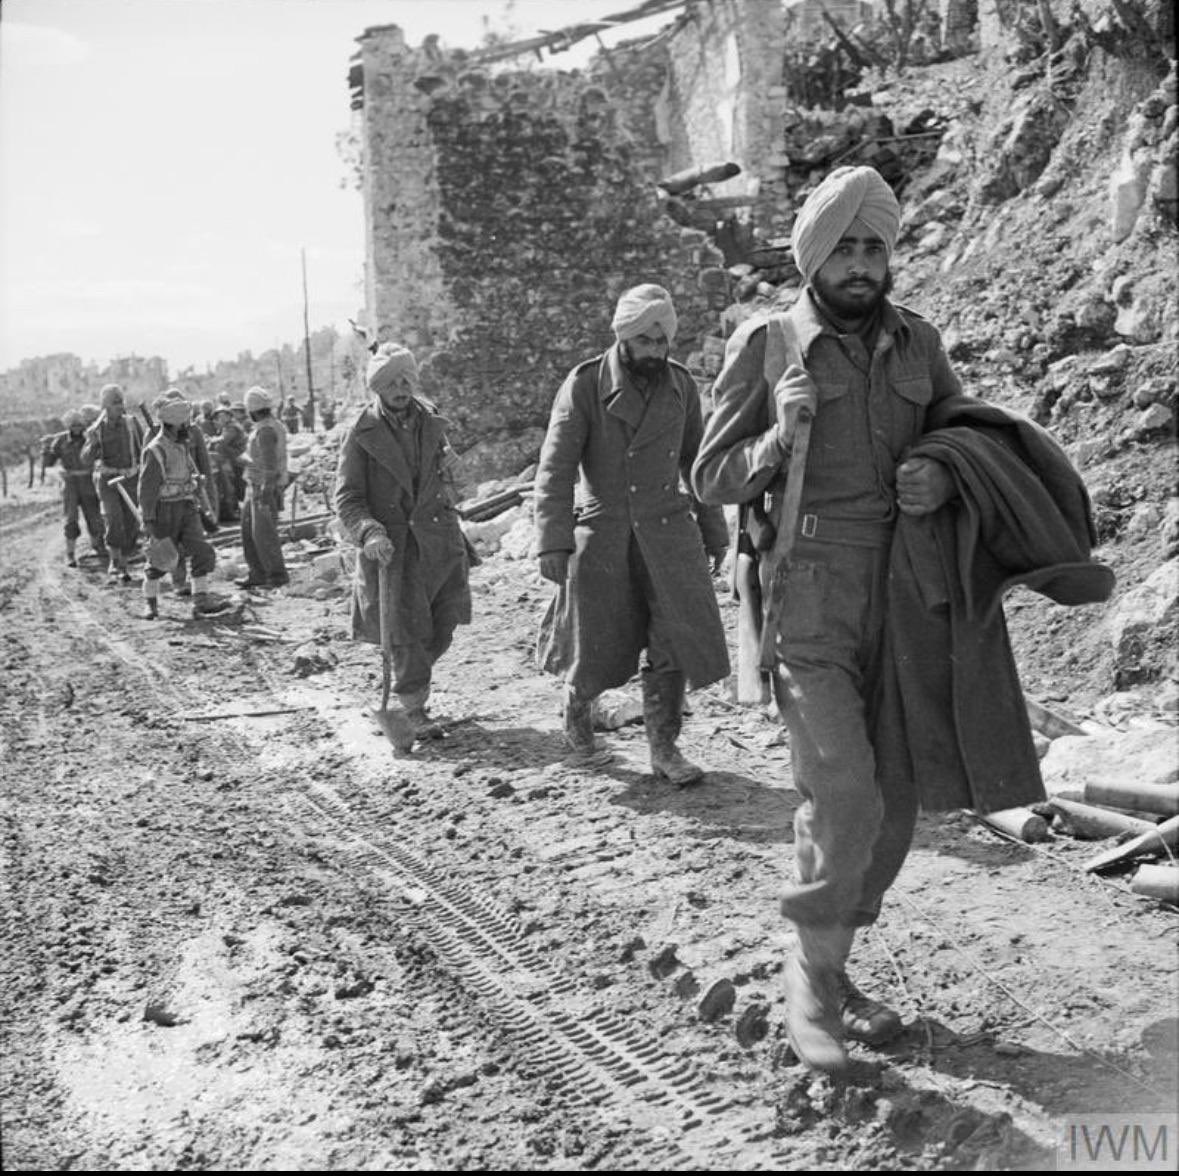 Remembering the ending of the Battle of Monte Cassino today. Sikhs in the Indian division played a significant role with many accounts of bravery and valor demonstrated on the battlefield. Lest we Forget🌹#Sikh #BritishArmy #italy #montecassino